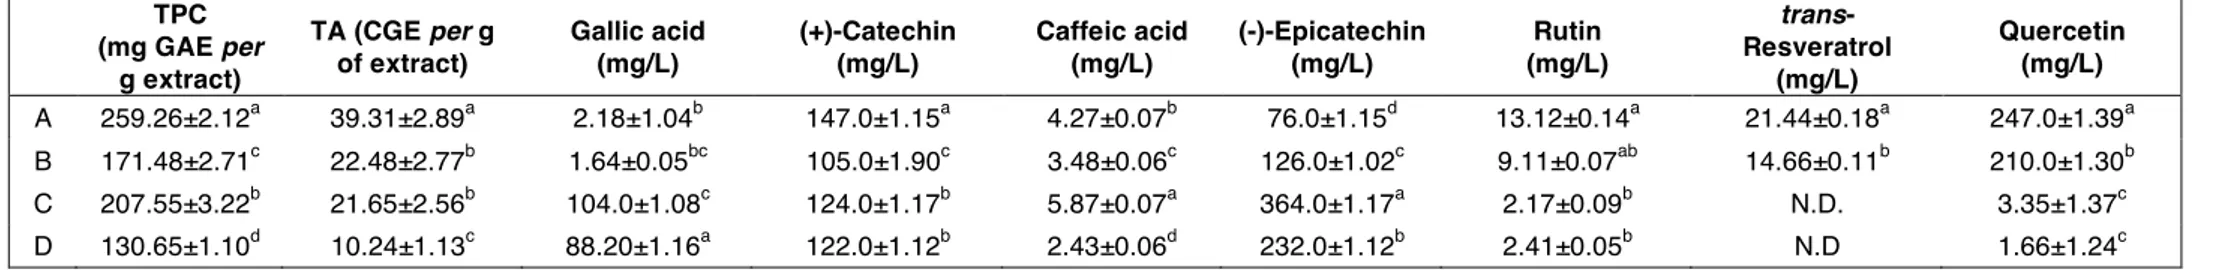 Table 2. TPC and phenolic profile of Sangiovese skins and seeds extracts. 